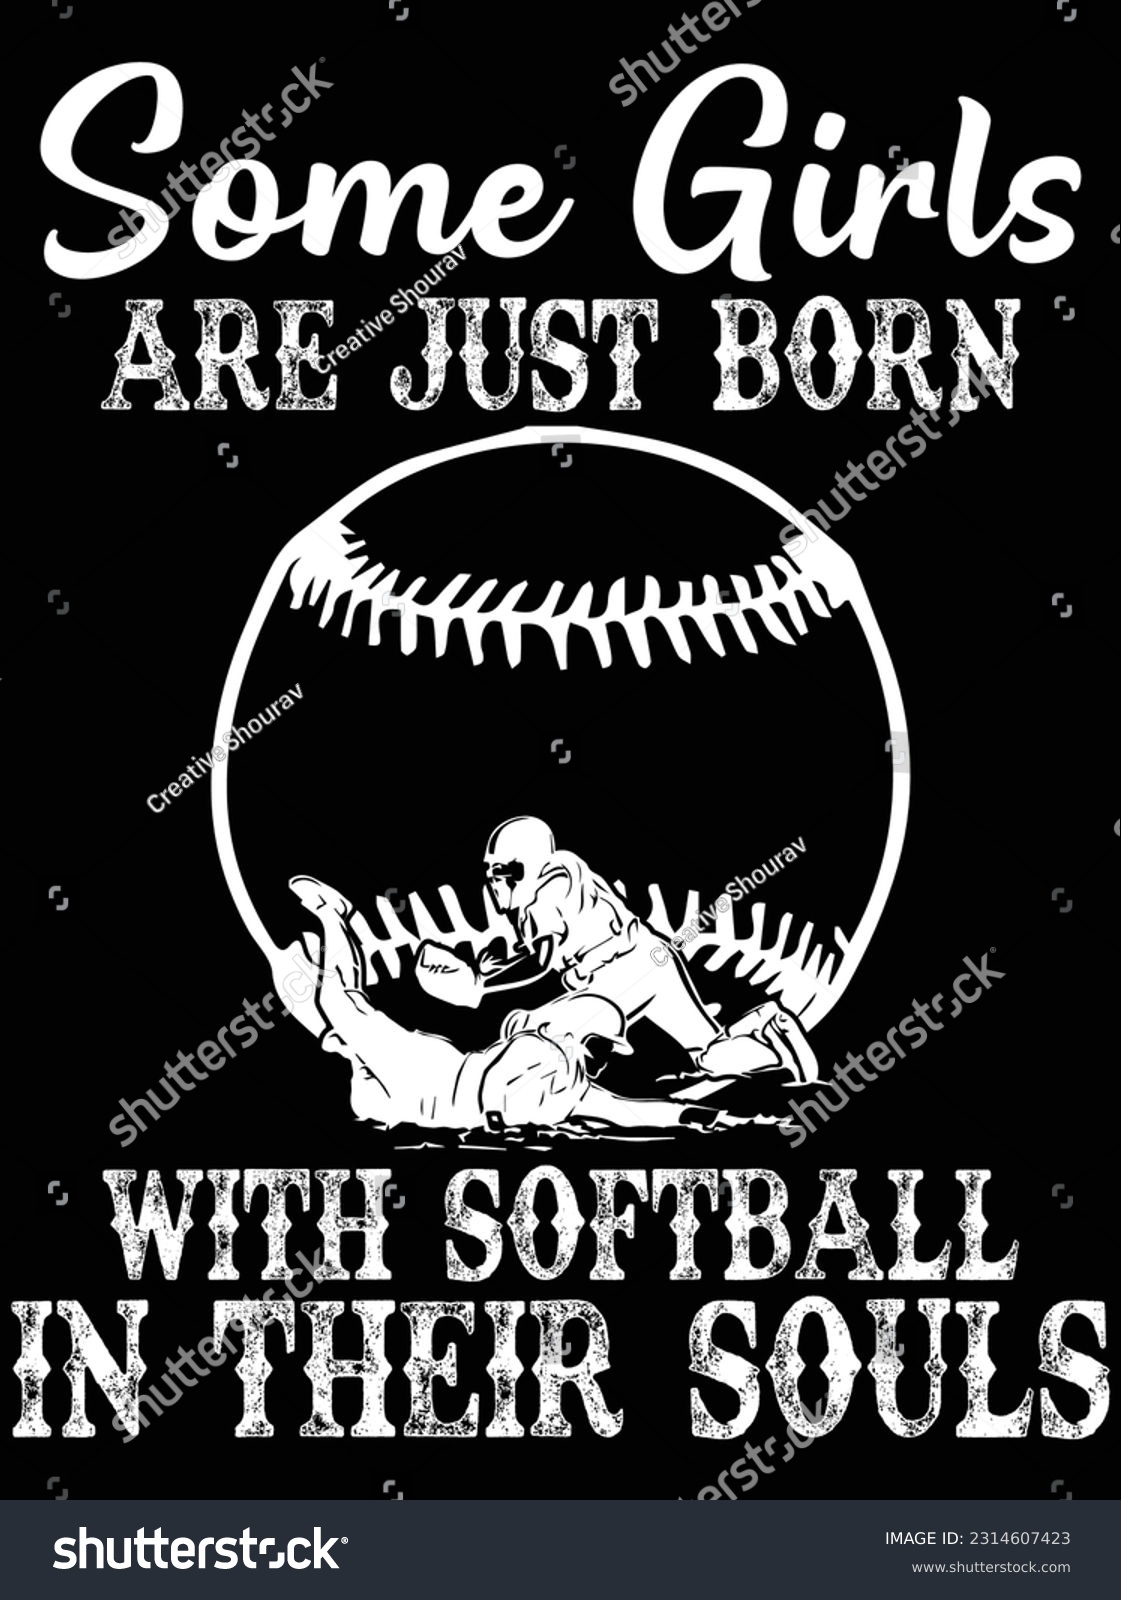 SVG of Some girls are just born with softball vector art design, eps file. design file for t-shirt. SVG, EPS cuttable design file svg